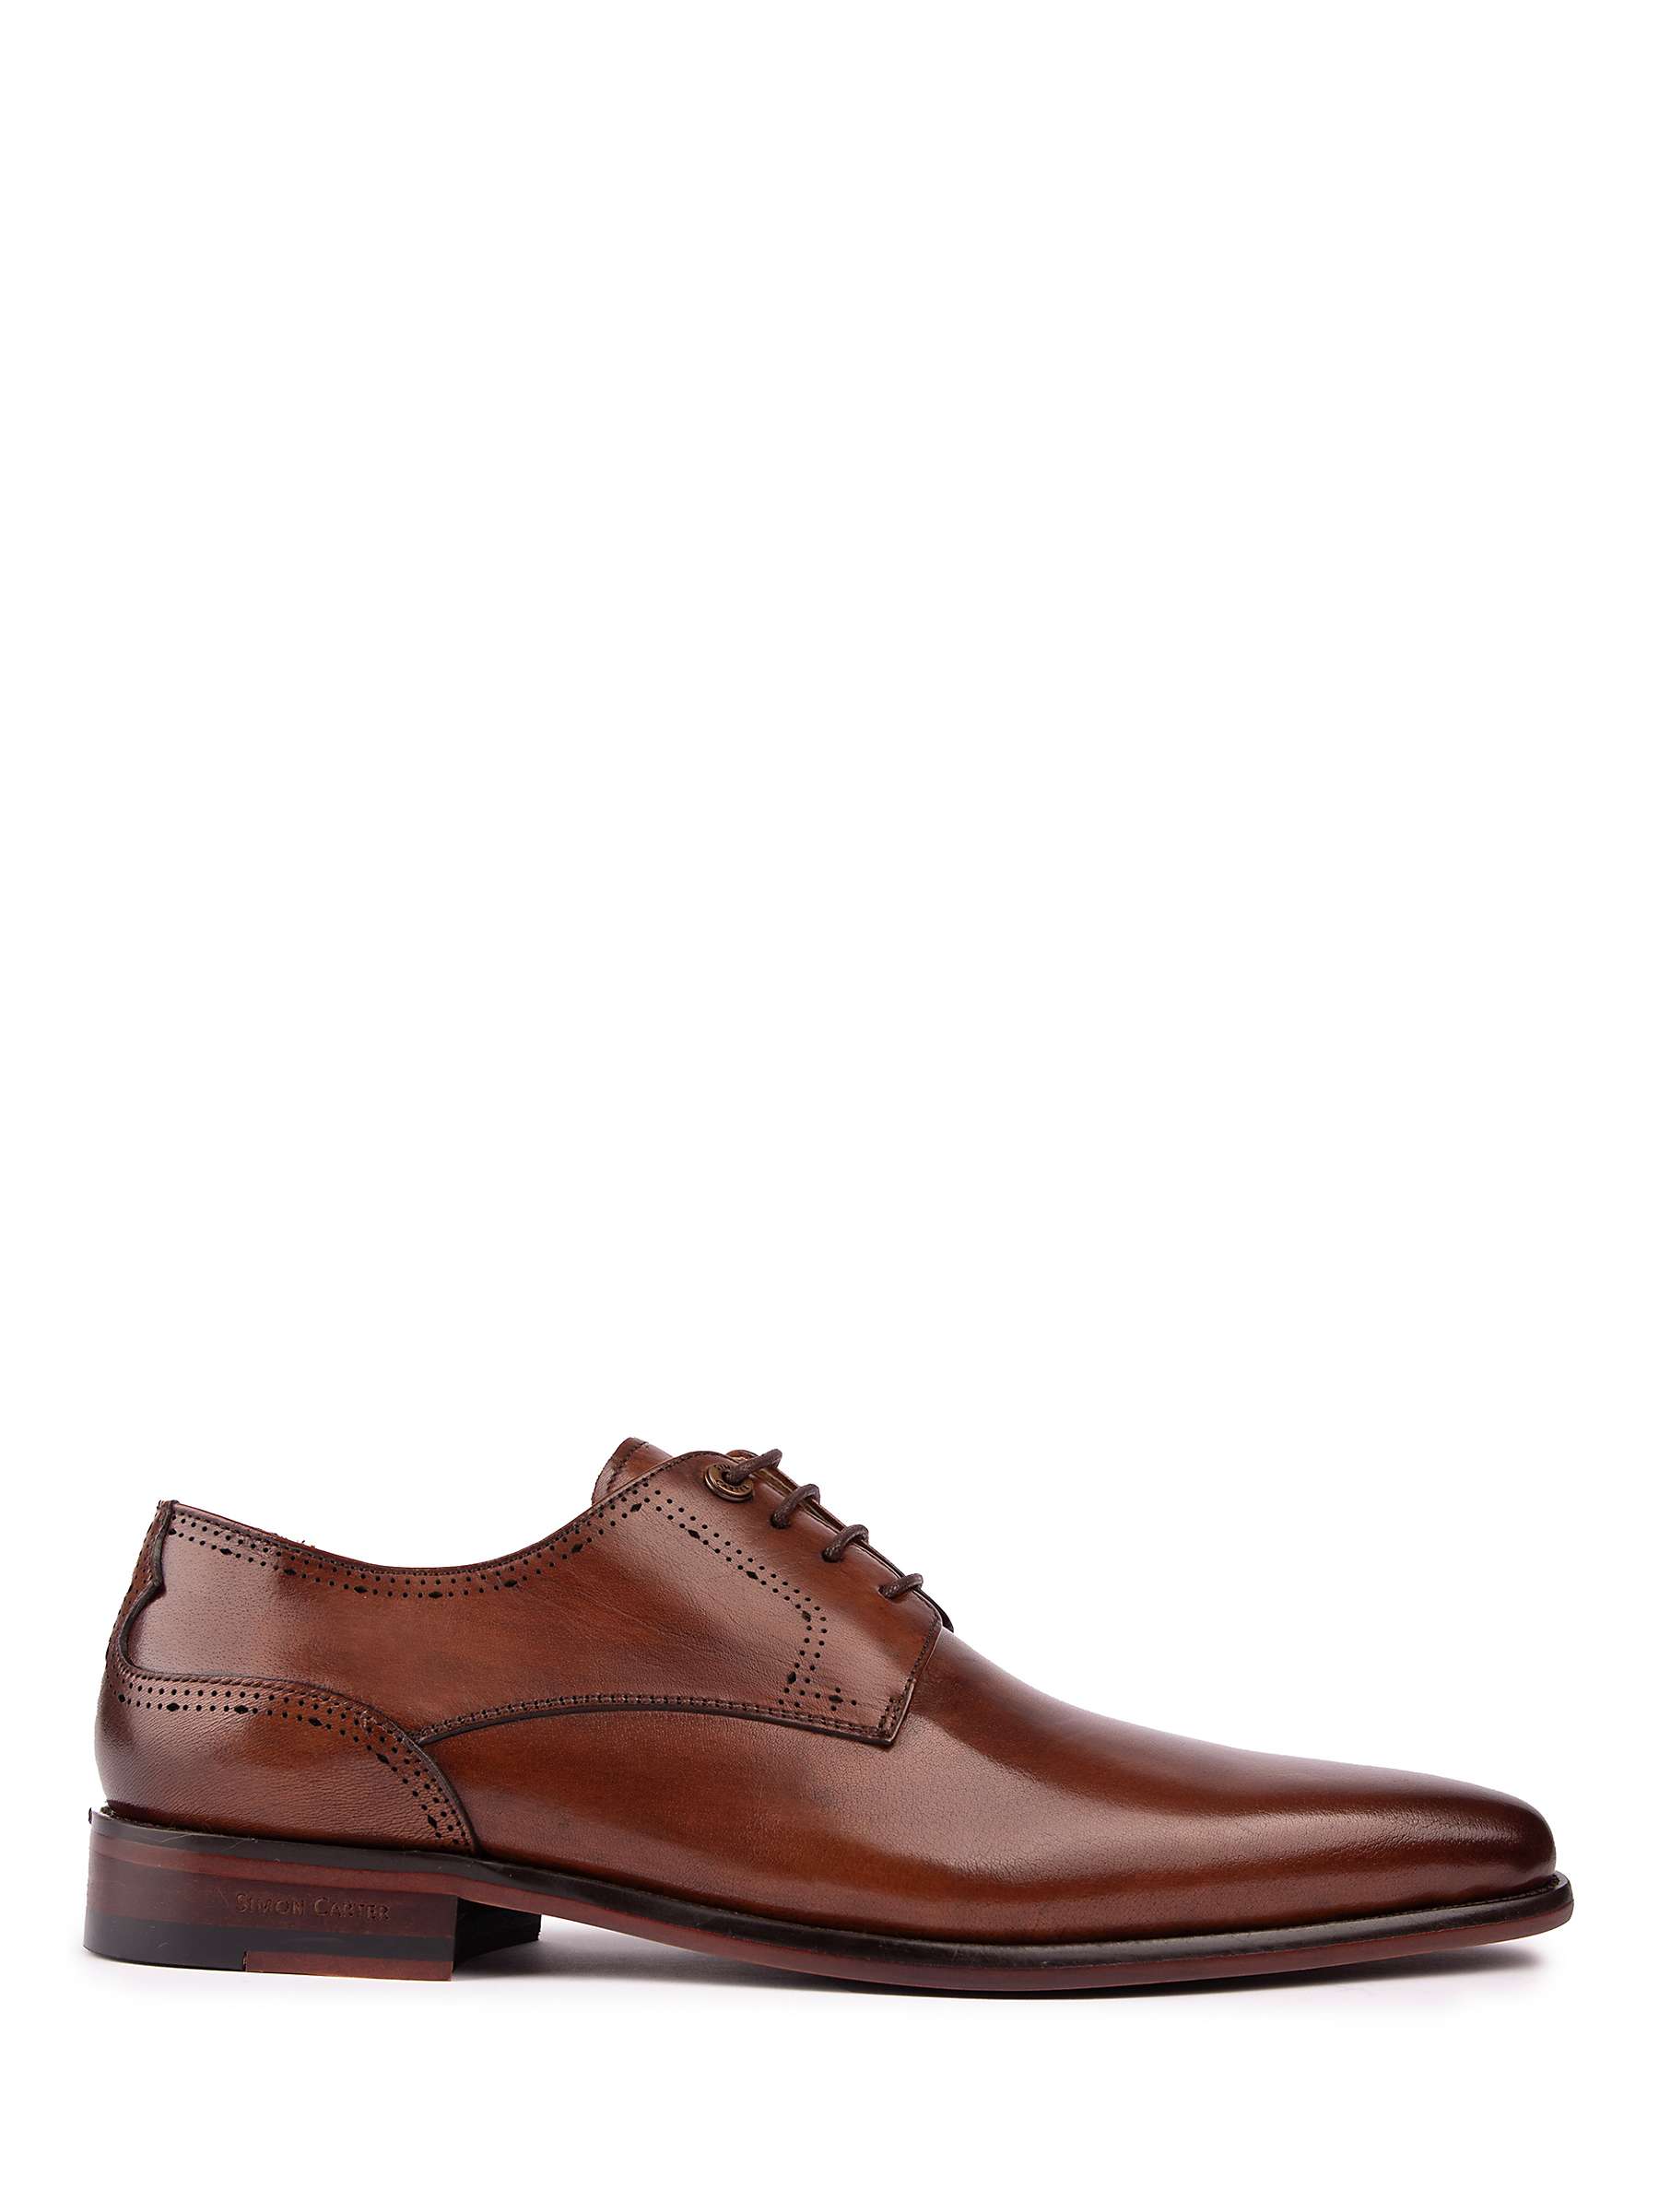 Buy Simon Carter Warren Leather Lace Up Shoes Online at johnlewis.com